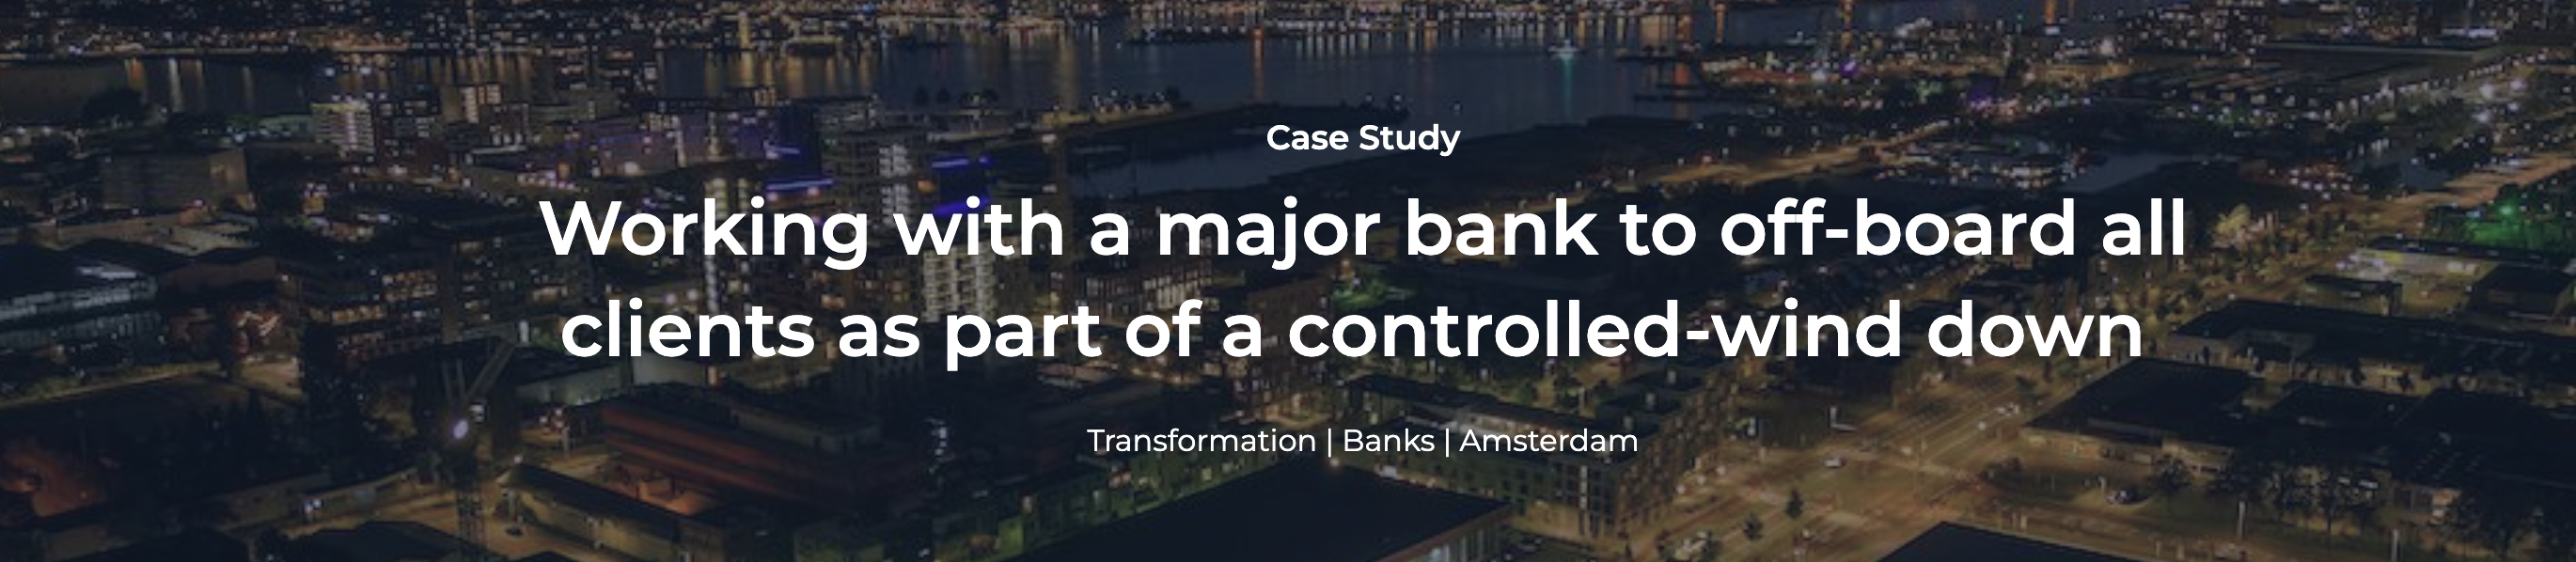 Transformation Case Study: Working with a bank to off-board clients